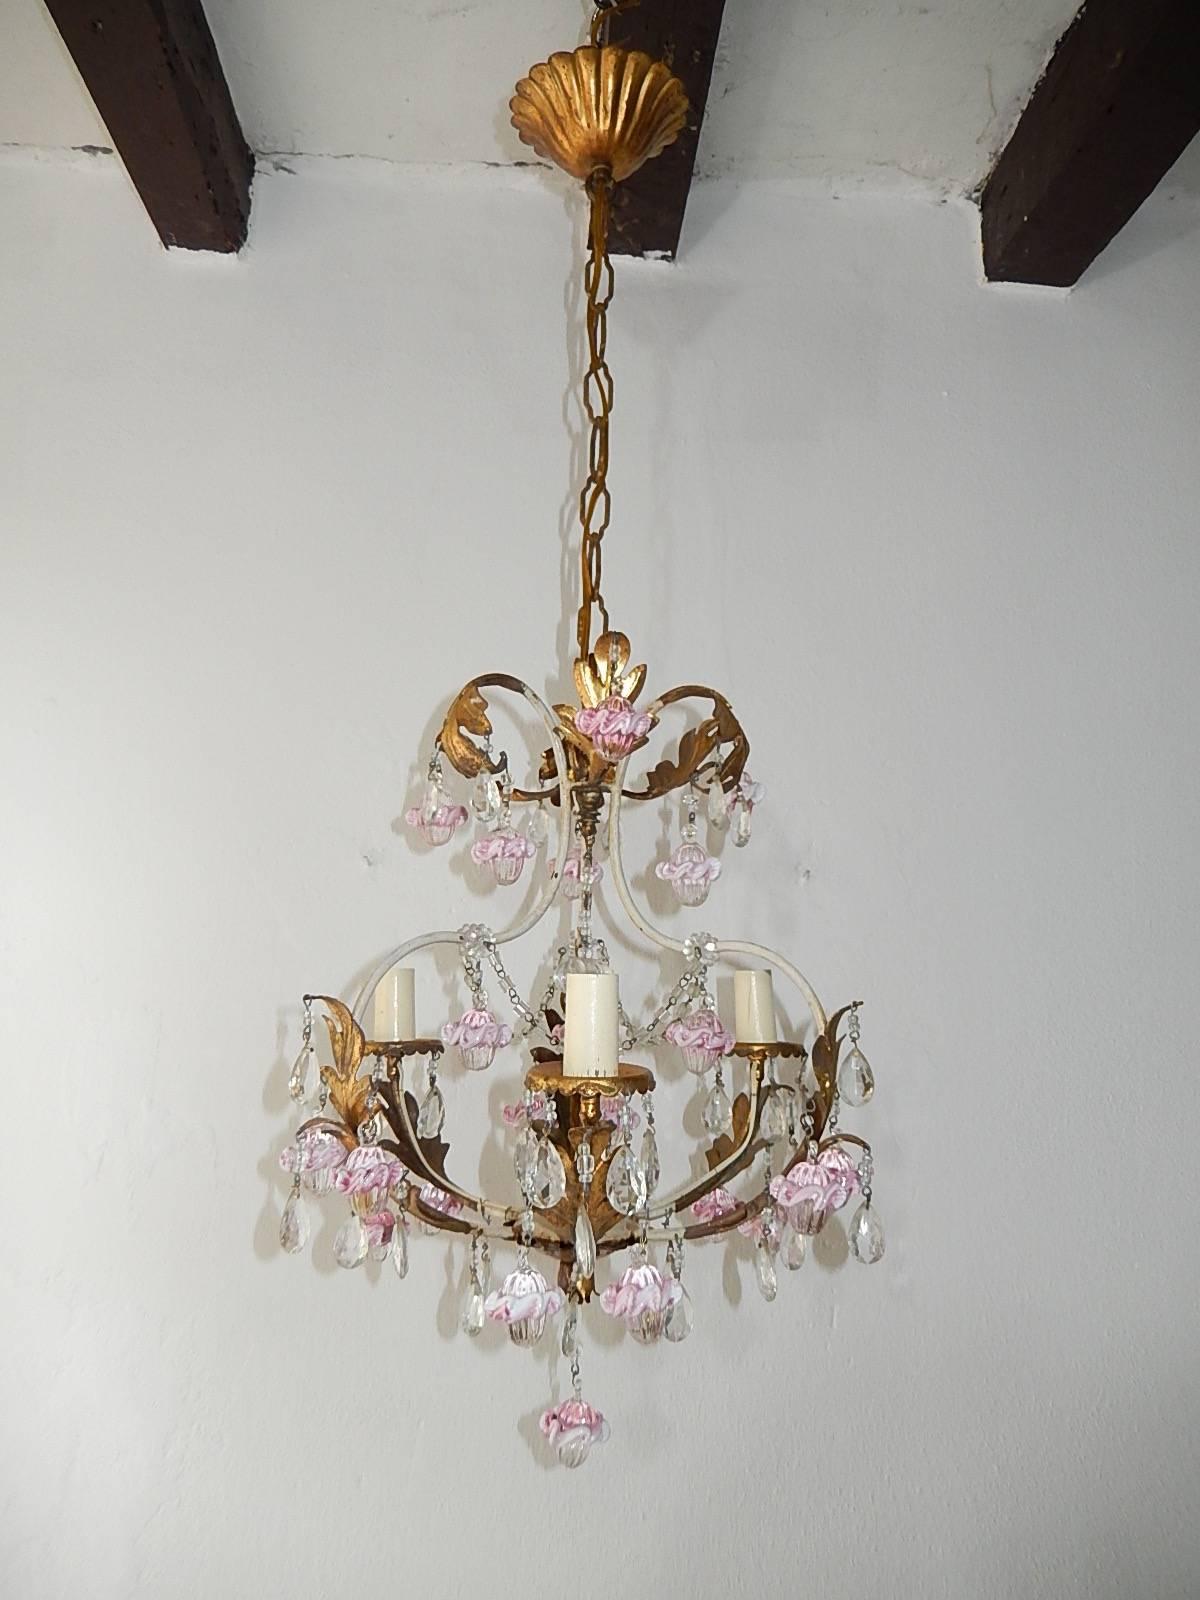 Housing three lights, re-wired and ready to hang! Gilt metal tole body dripping with rare pink ribbon Murano balls. Swags of crystal macaroni beads as well. Adding another 18 inches of original chain and canopy. Free priority shipping from Italy.